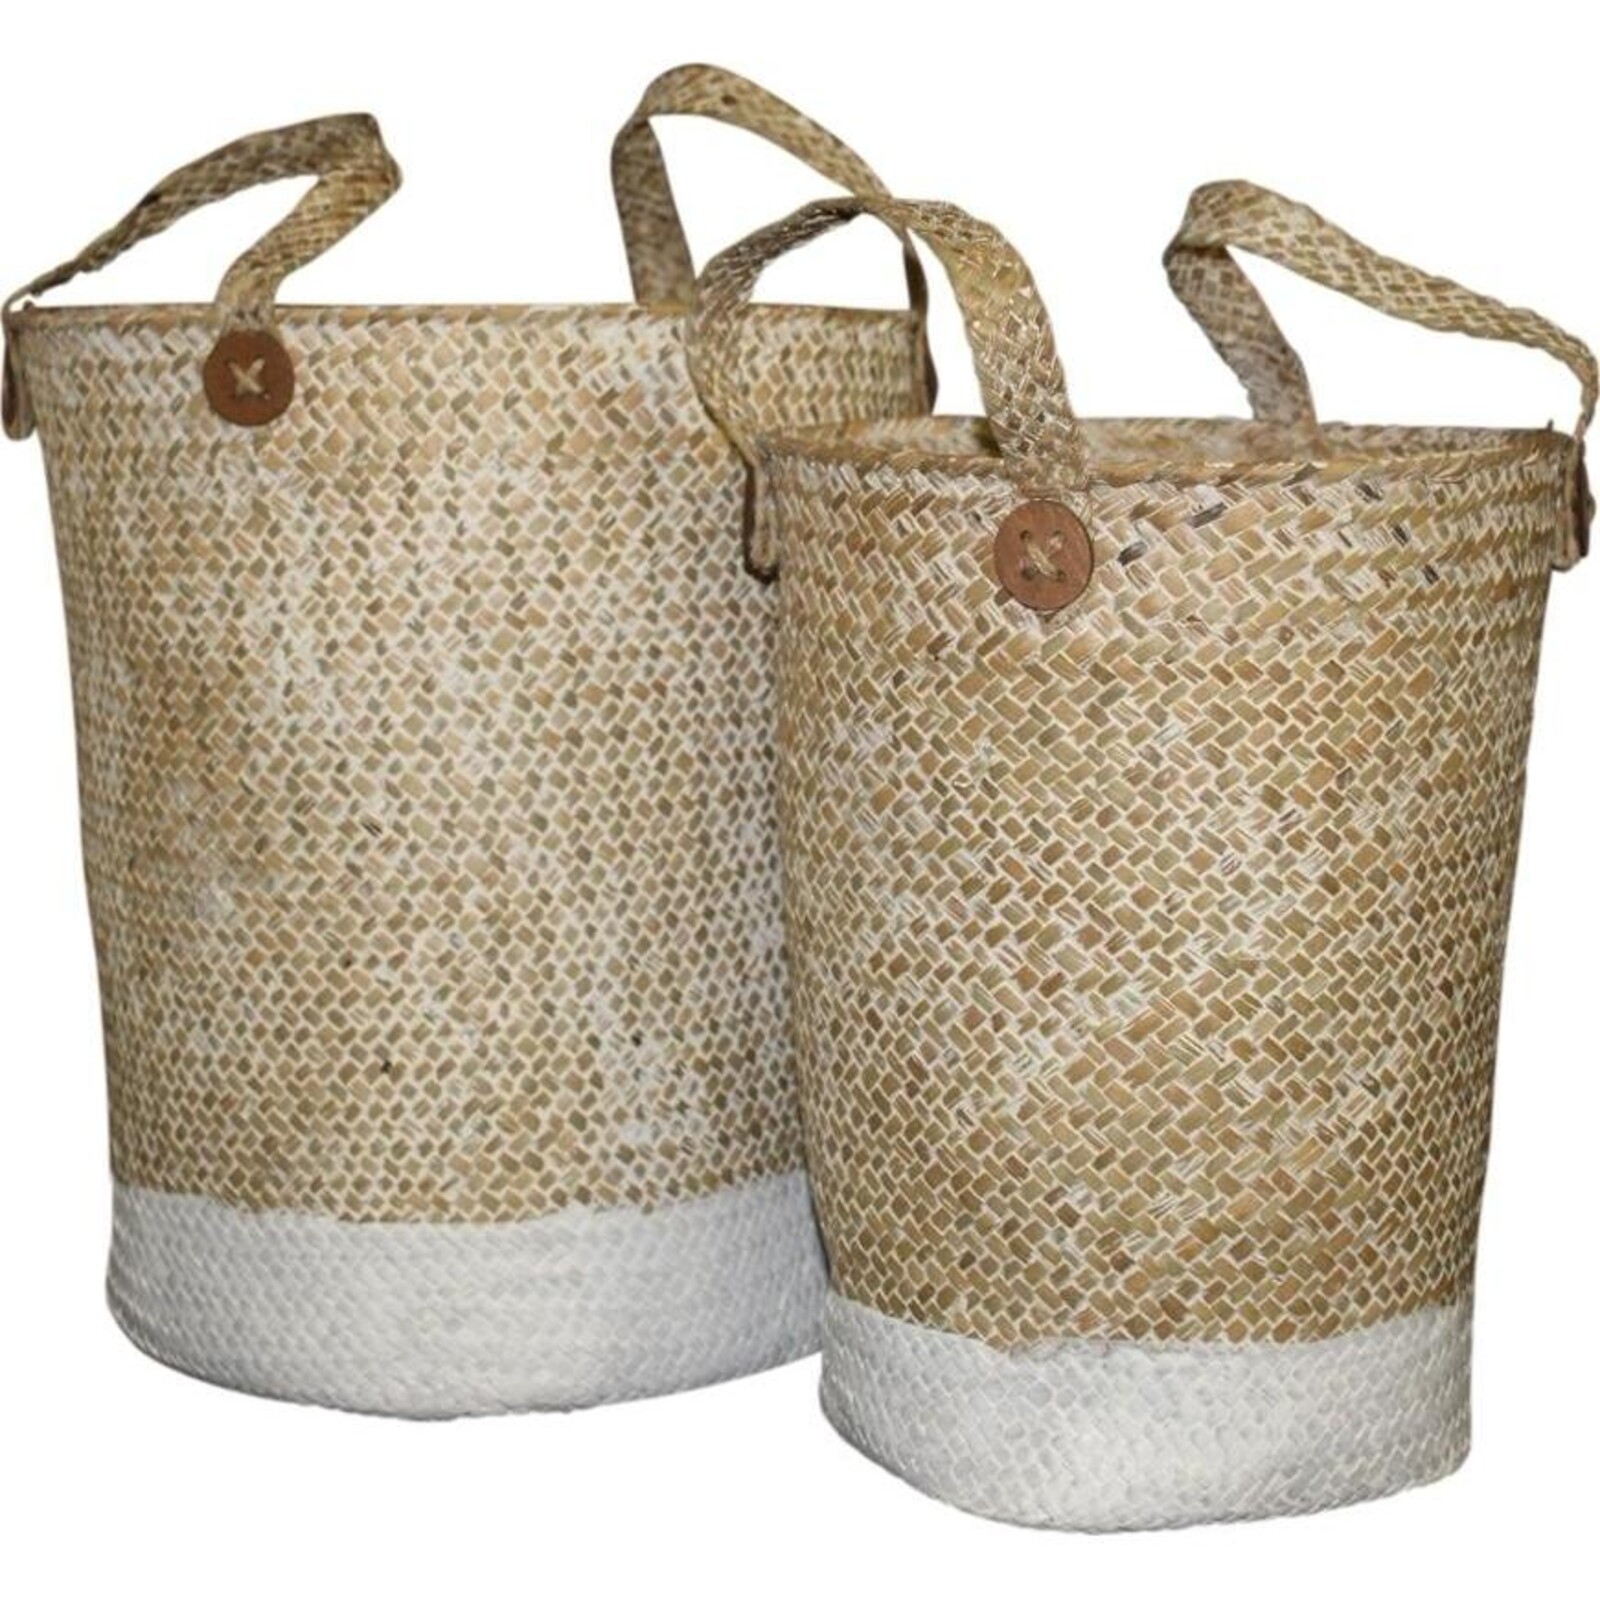 Woven Button Dipped Basket S/2